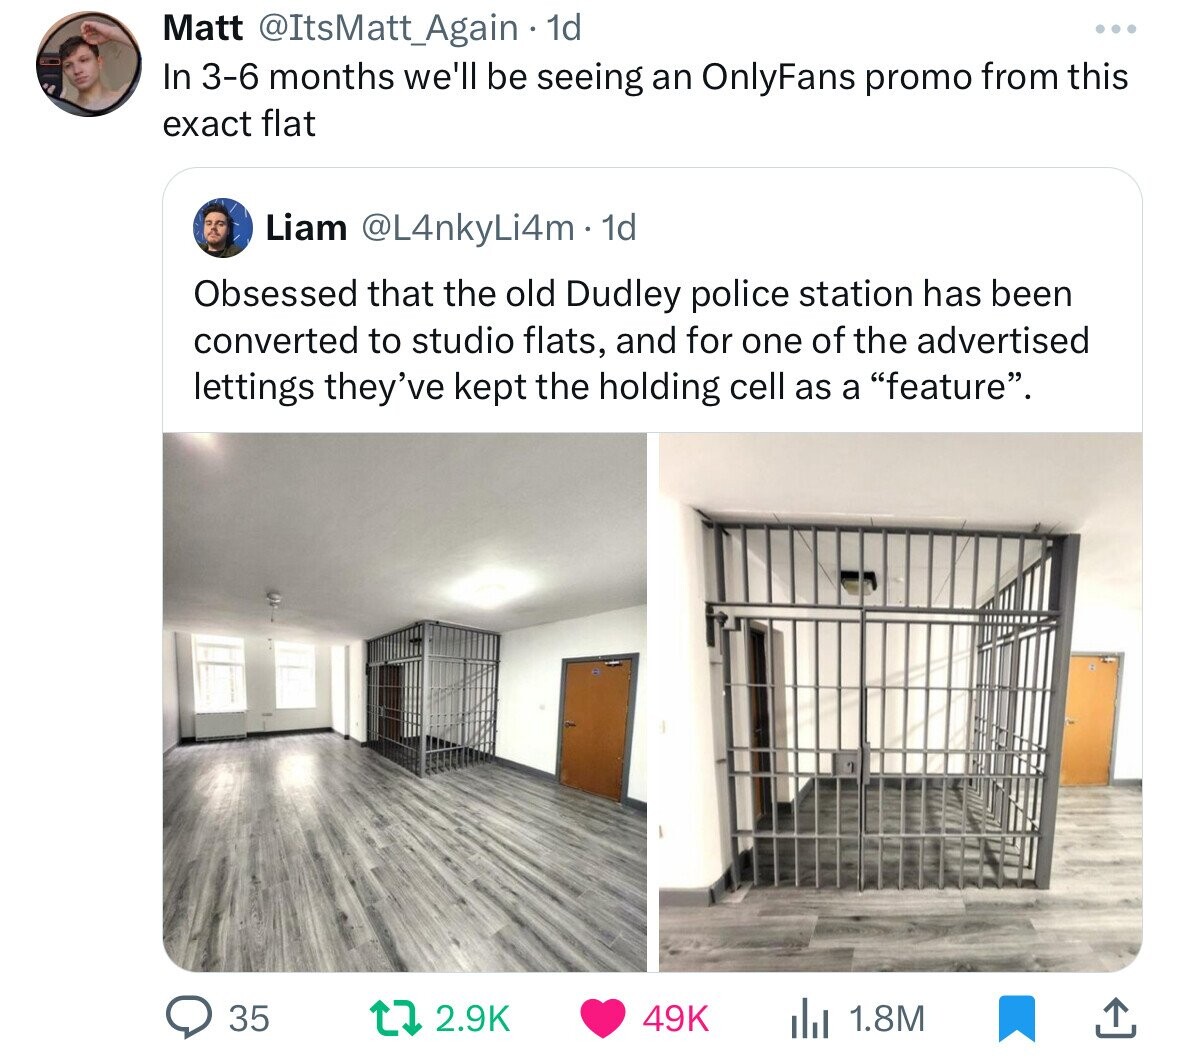 Matt @ItsMatt_Again 1d In 3-6 months we'll be seeing an OnlyFans promo from this exact flat Liam @L4nkyLi4m.1 1d Obsessed that the old Dudley police station has been converted to studio flats, and for one of the advertised lettings they've kept the holding cell as a feature. 35 2.9K 49K 1.8M 